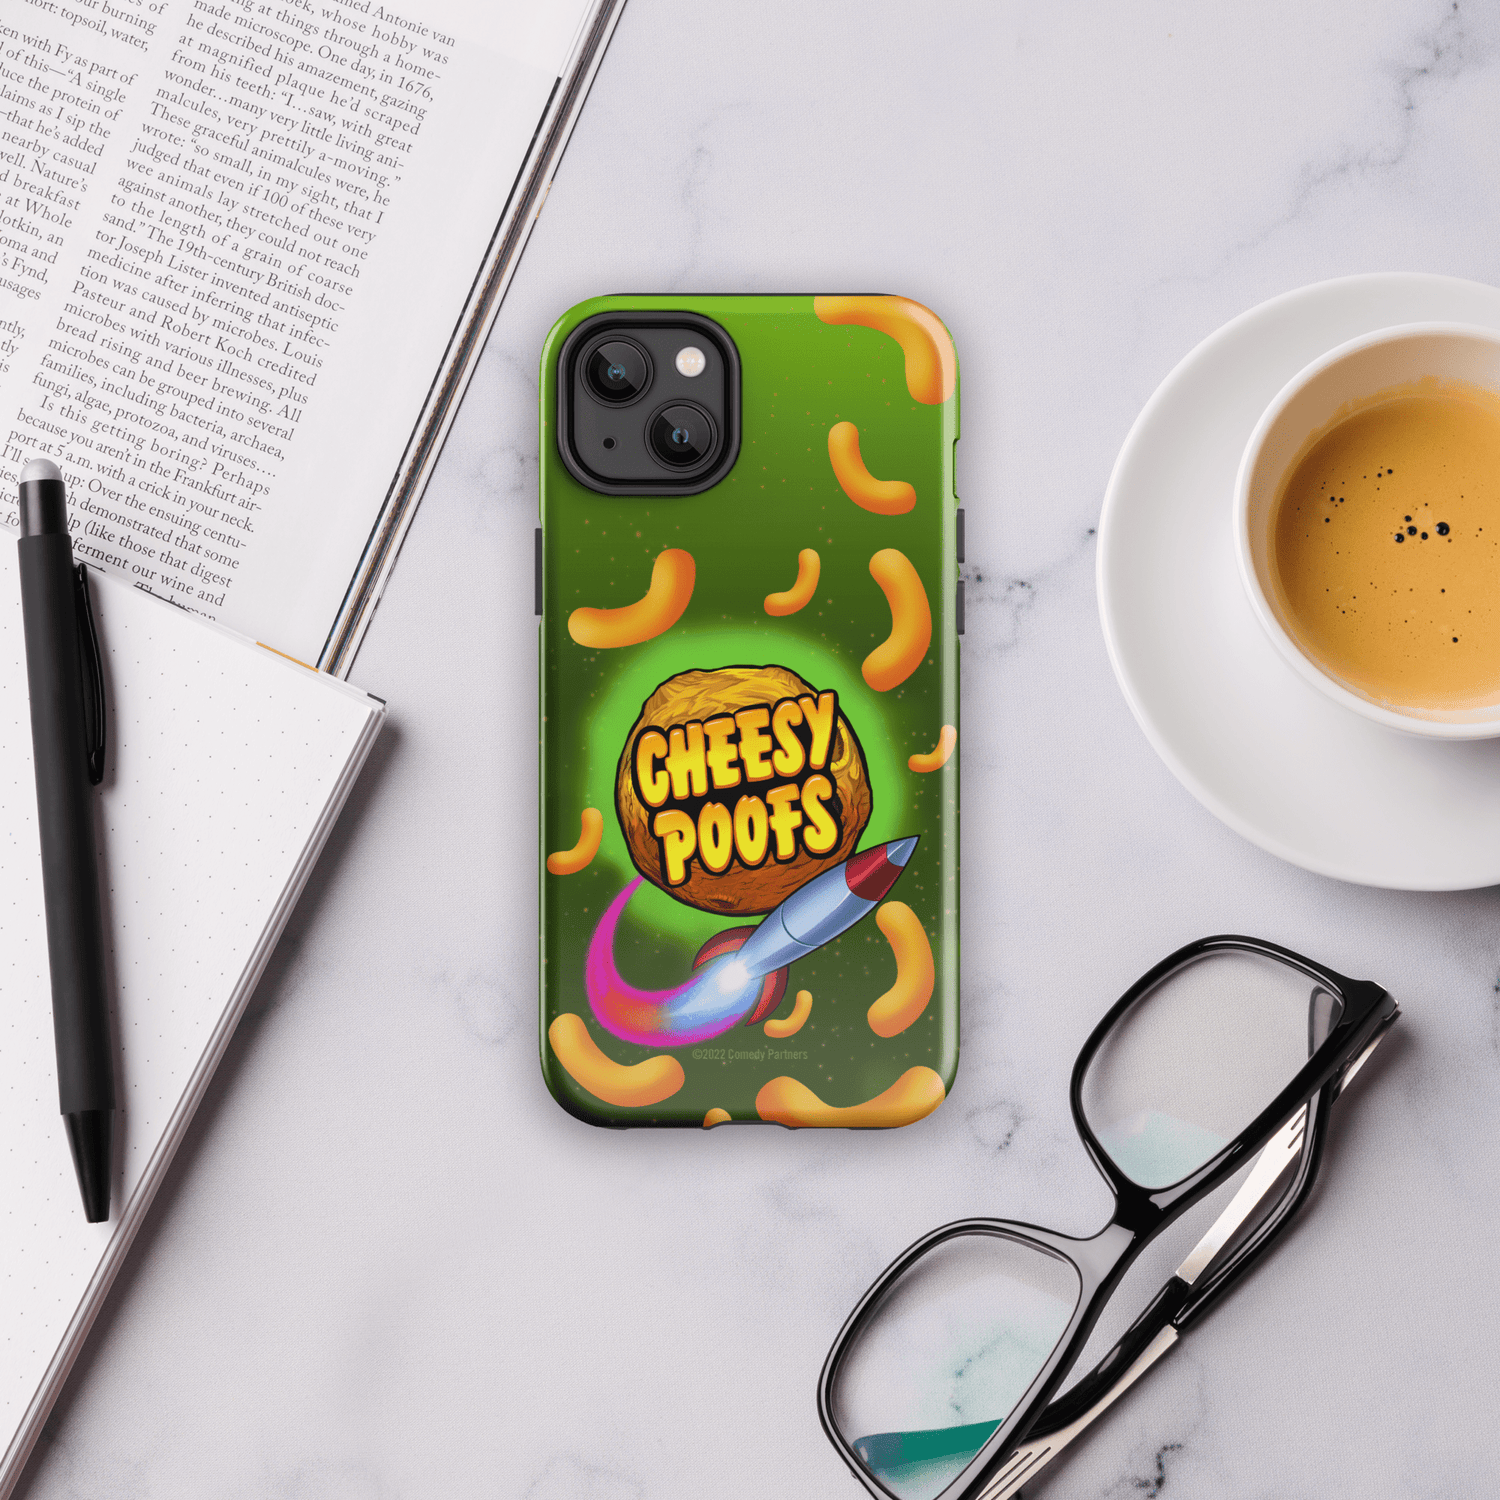 South Park Cheesy Poofs Tough Phone Case - iPhone - Paramount Shop